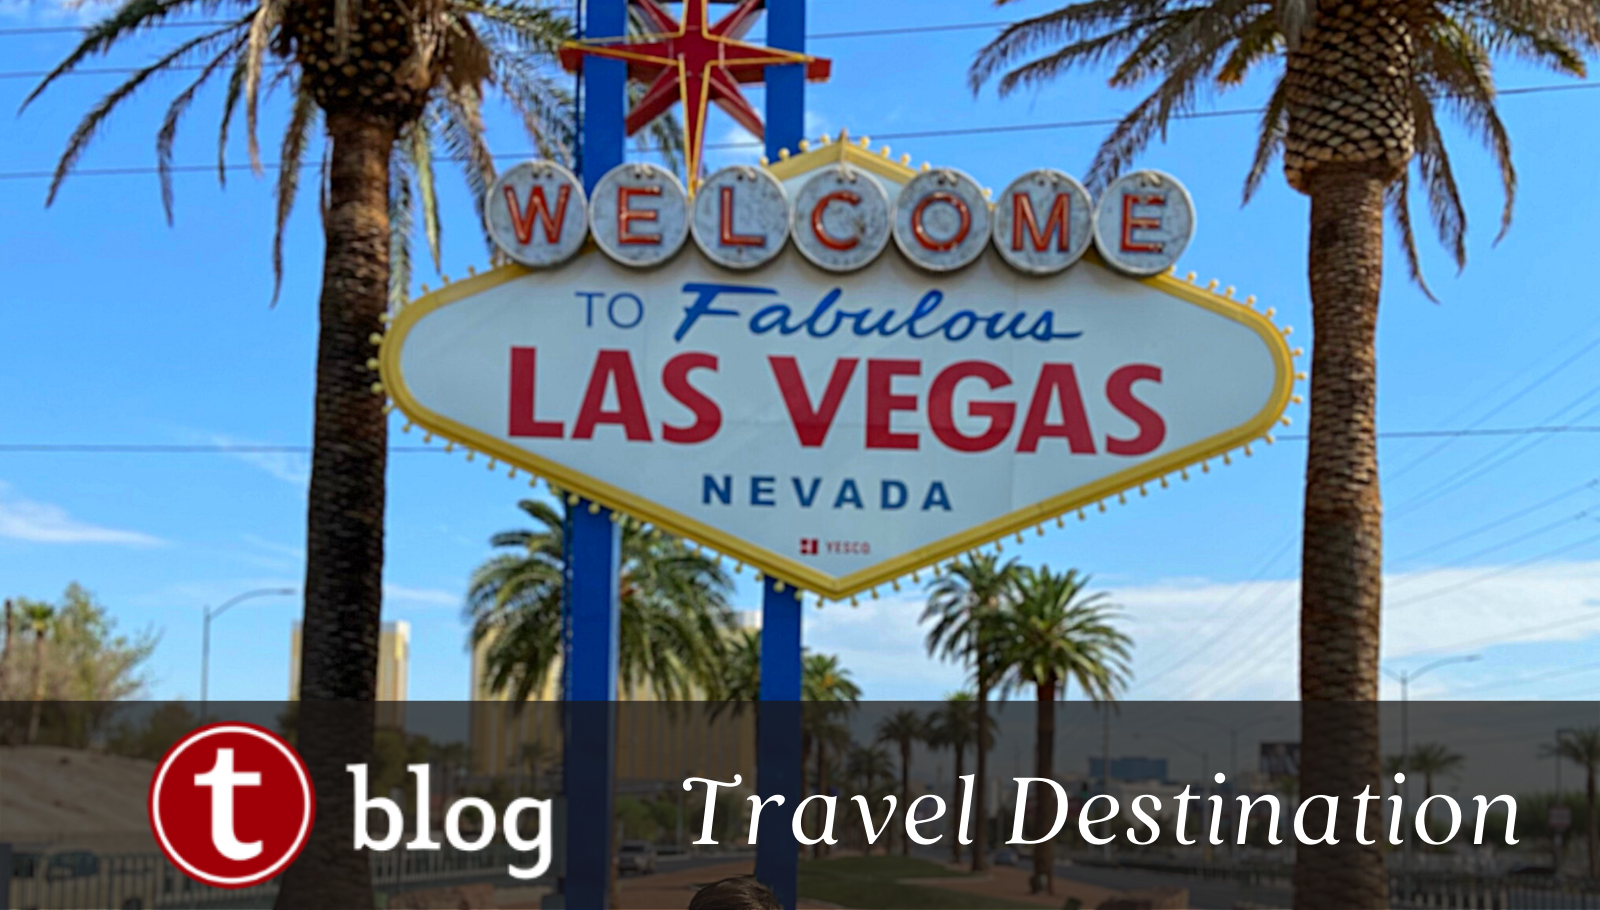 The Universal Influence of the Welcome to Fabulous Las Vegas Sign